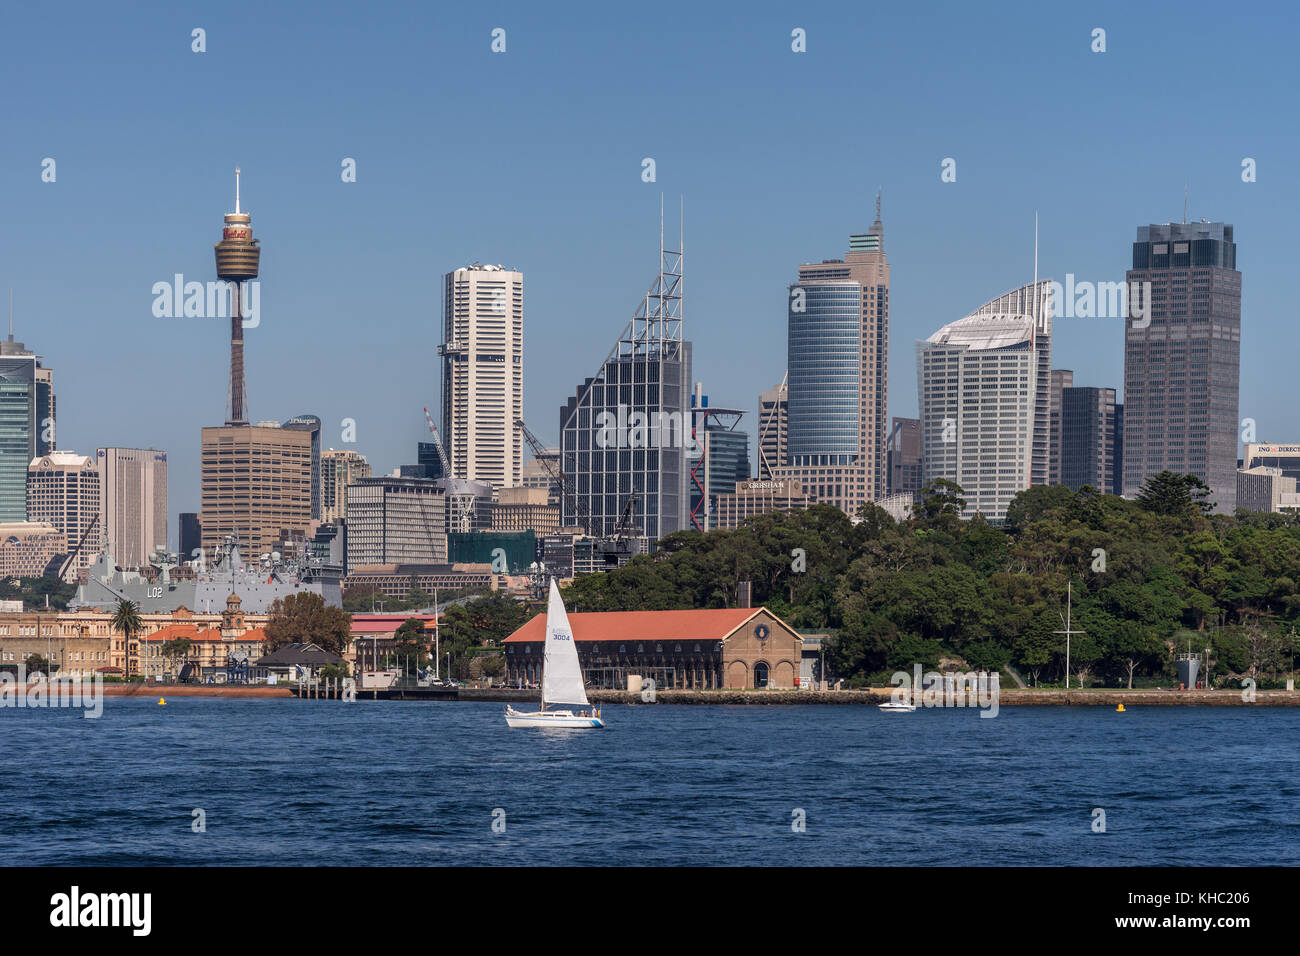 Sydney, Australia - March 26, 2017: Closeup kind of shot of selection of tall office towers skyline seen off the water under blue sky. White sail boat Stock Photo